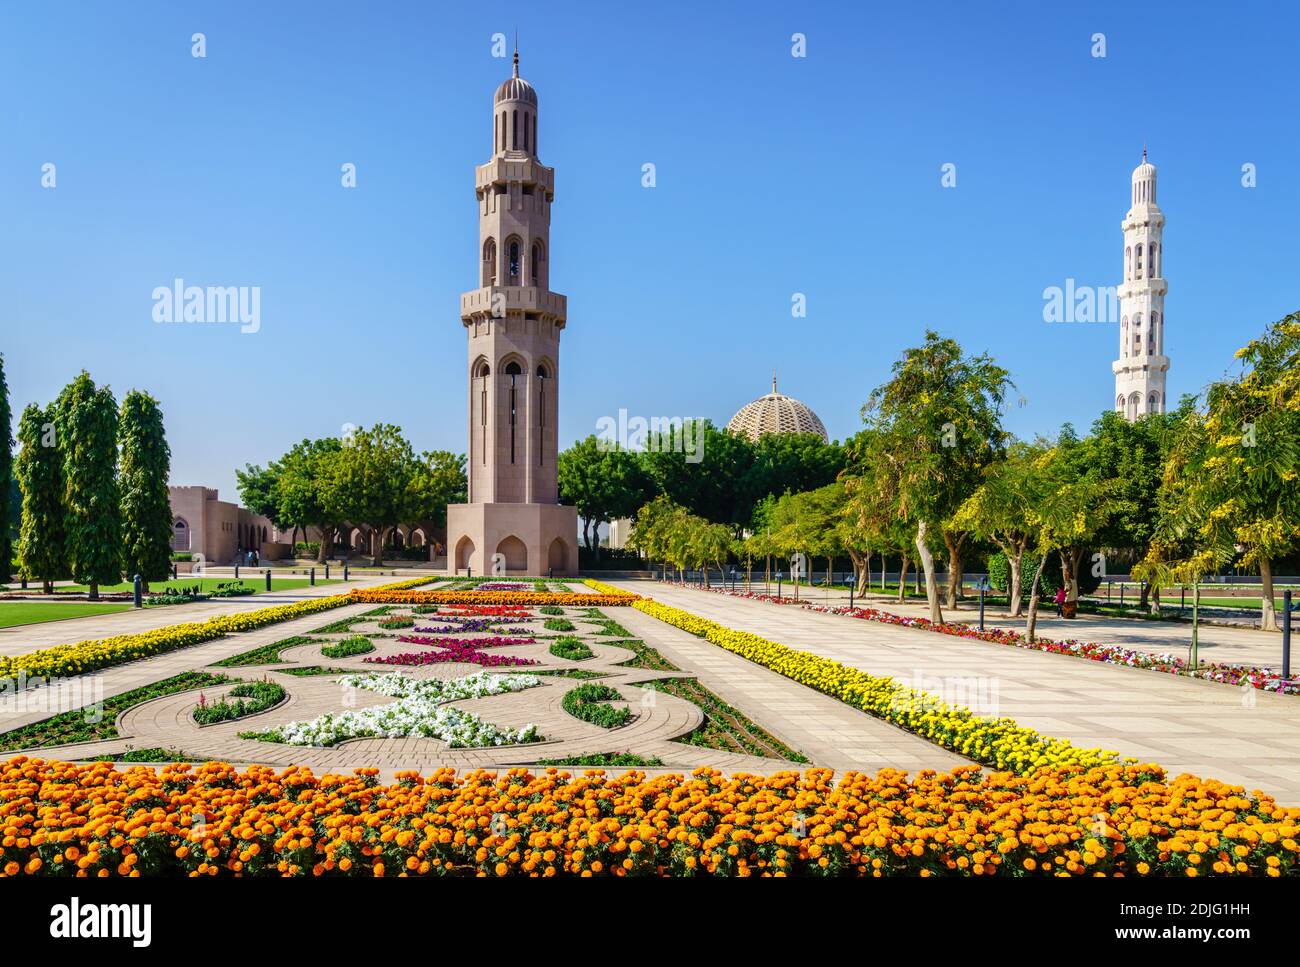 Garden at the Sultan Qaboos Grand Mosque in Muscat, Oman Stock Photo